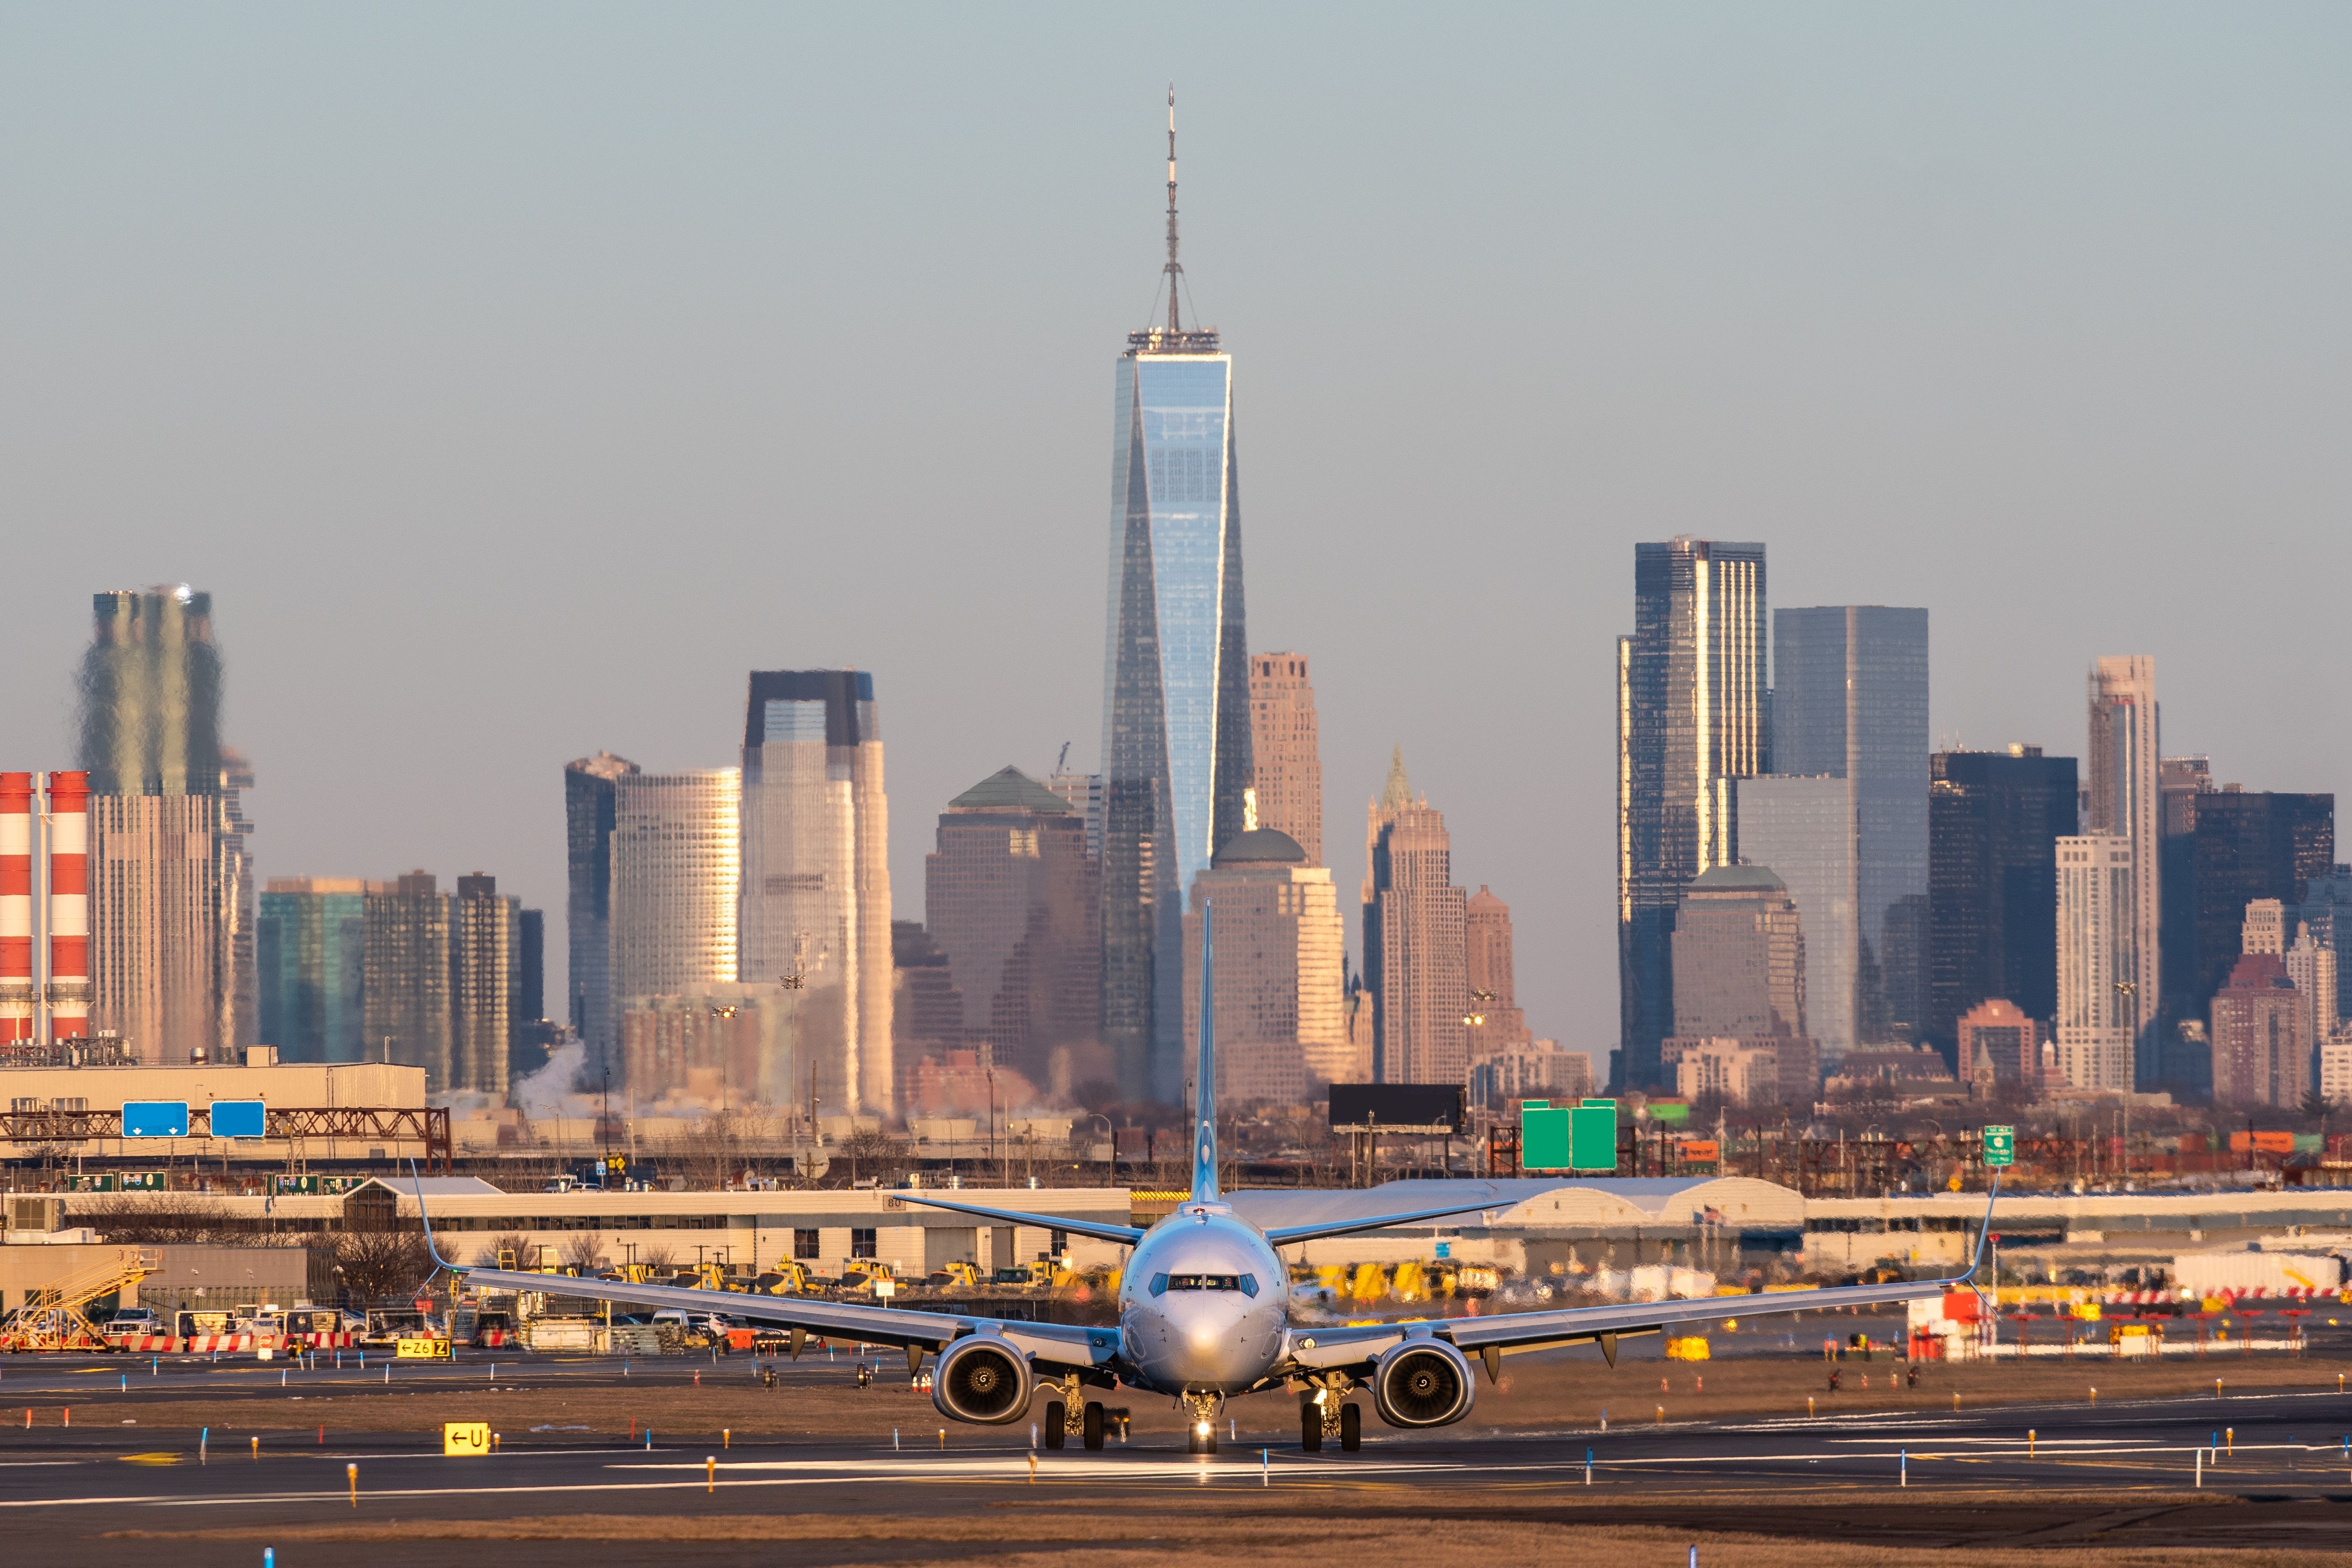 A 737 taxiing at Newark Liberty International Airport with the Manhattan skyline in the background.